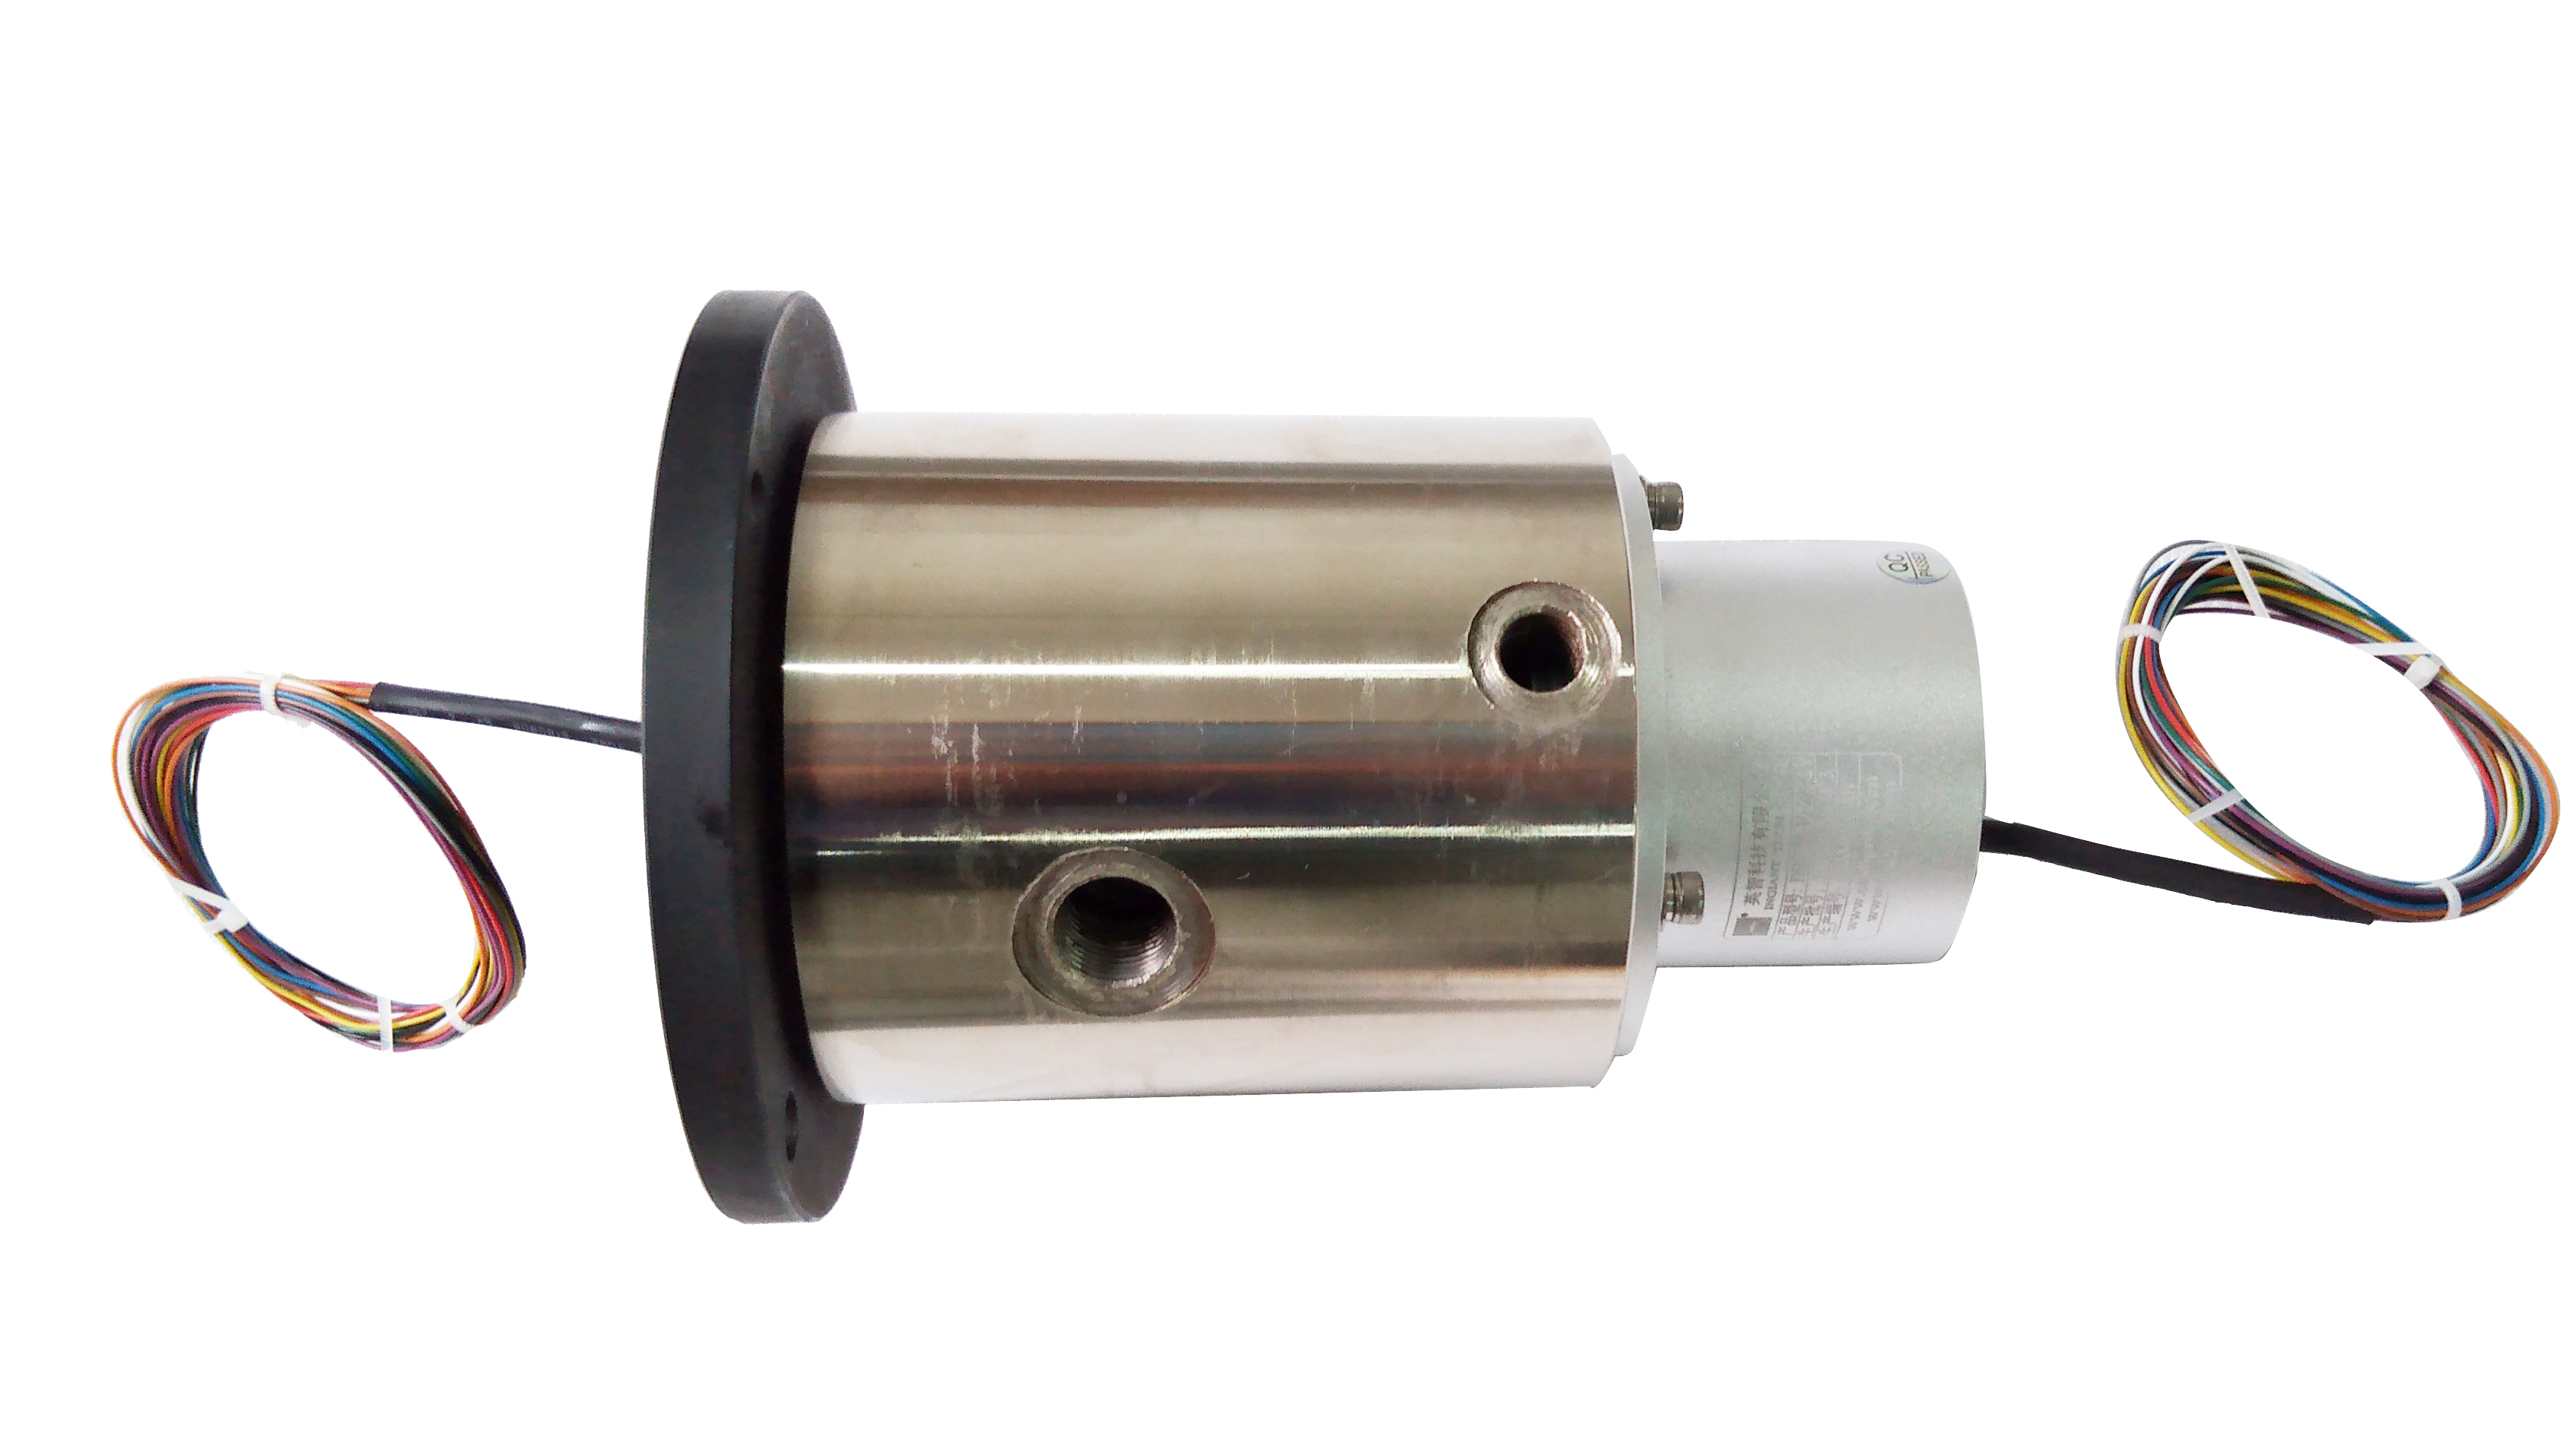 The difference between hydraulic slip rings and traditional slip rings